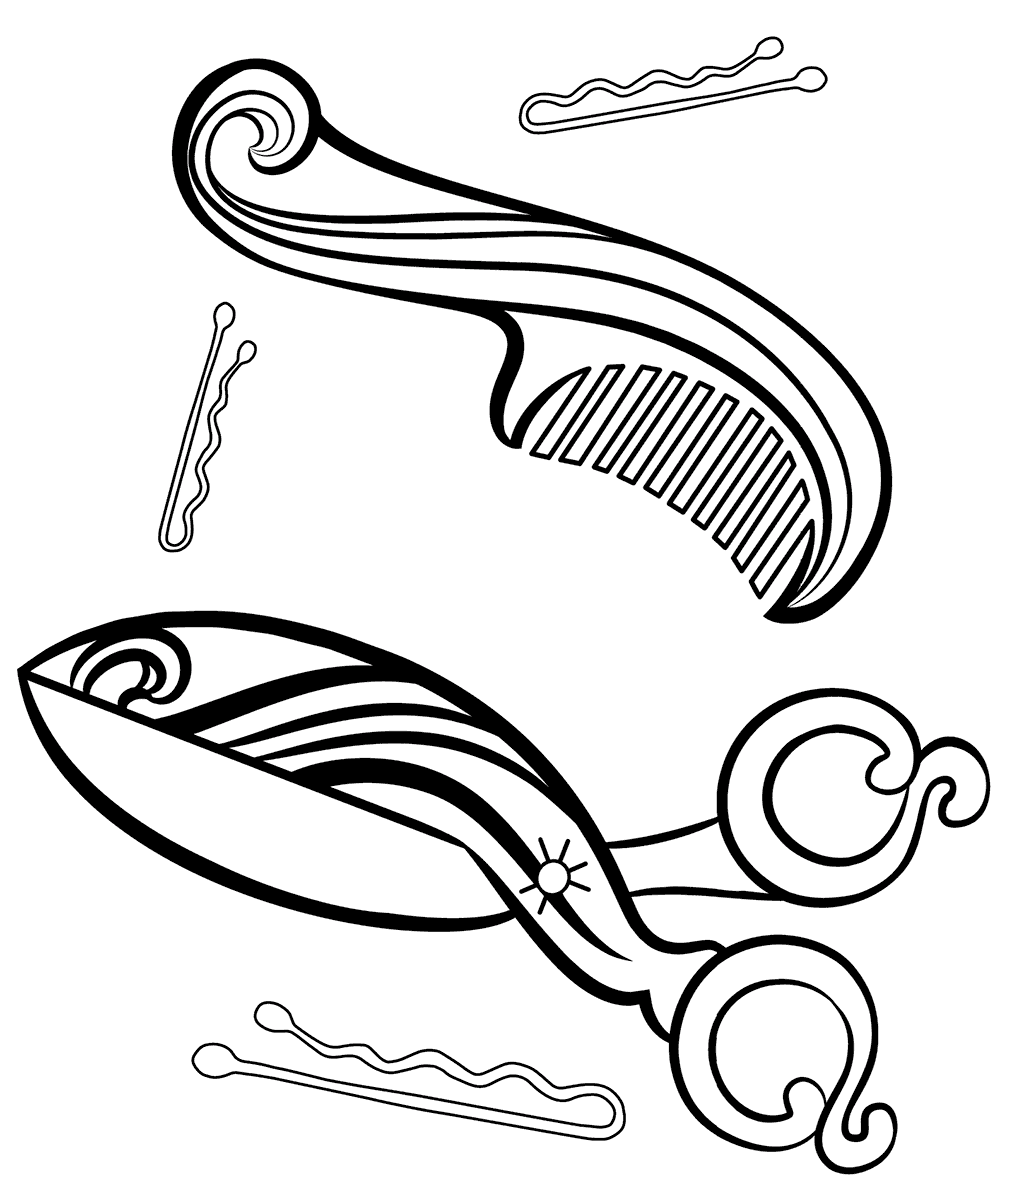 Scissors and Comb Coloring Pages - Get Coloring Pages